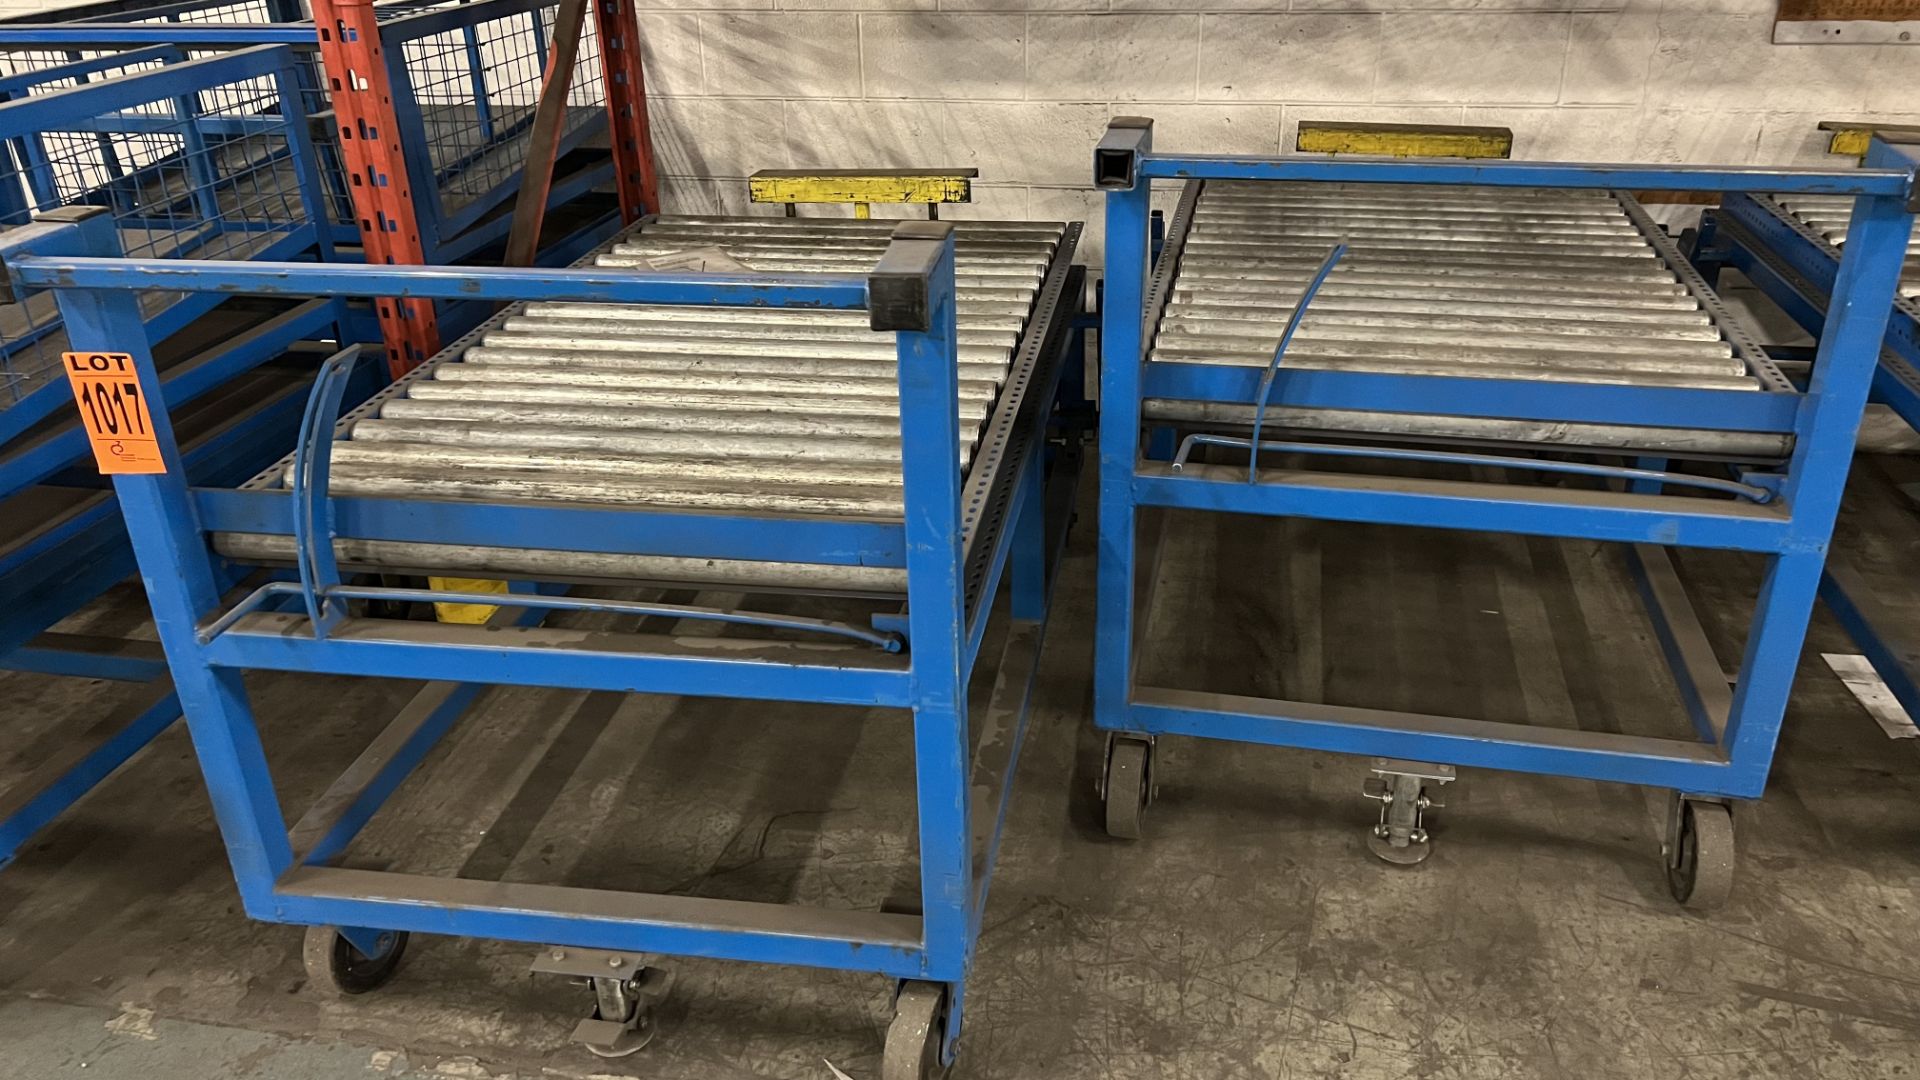 Lot of (2) steel frame manual roller conveyors w/ handles, casters, foot lock and adjustable height